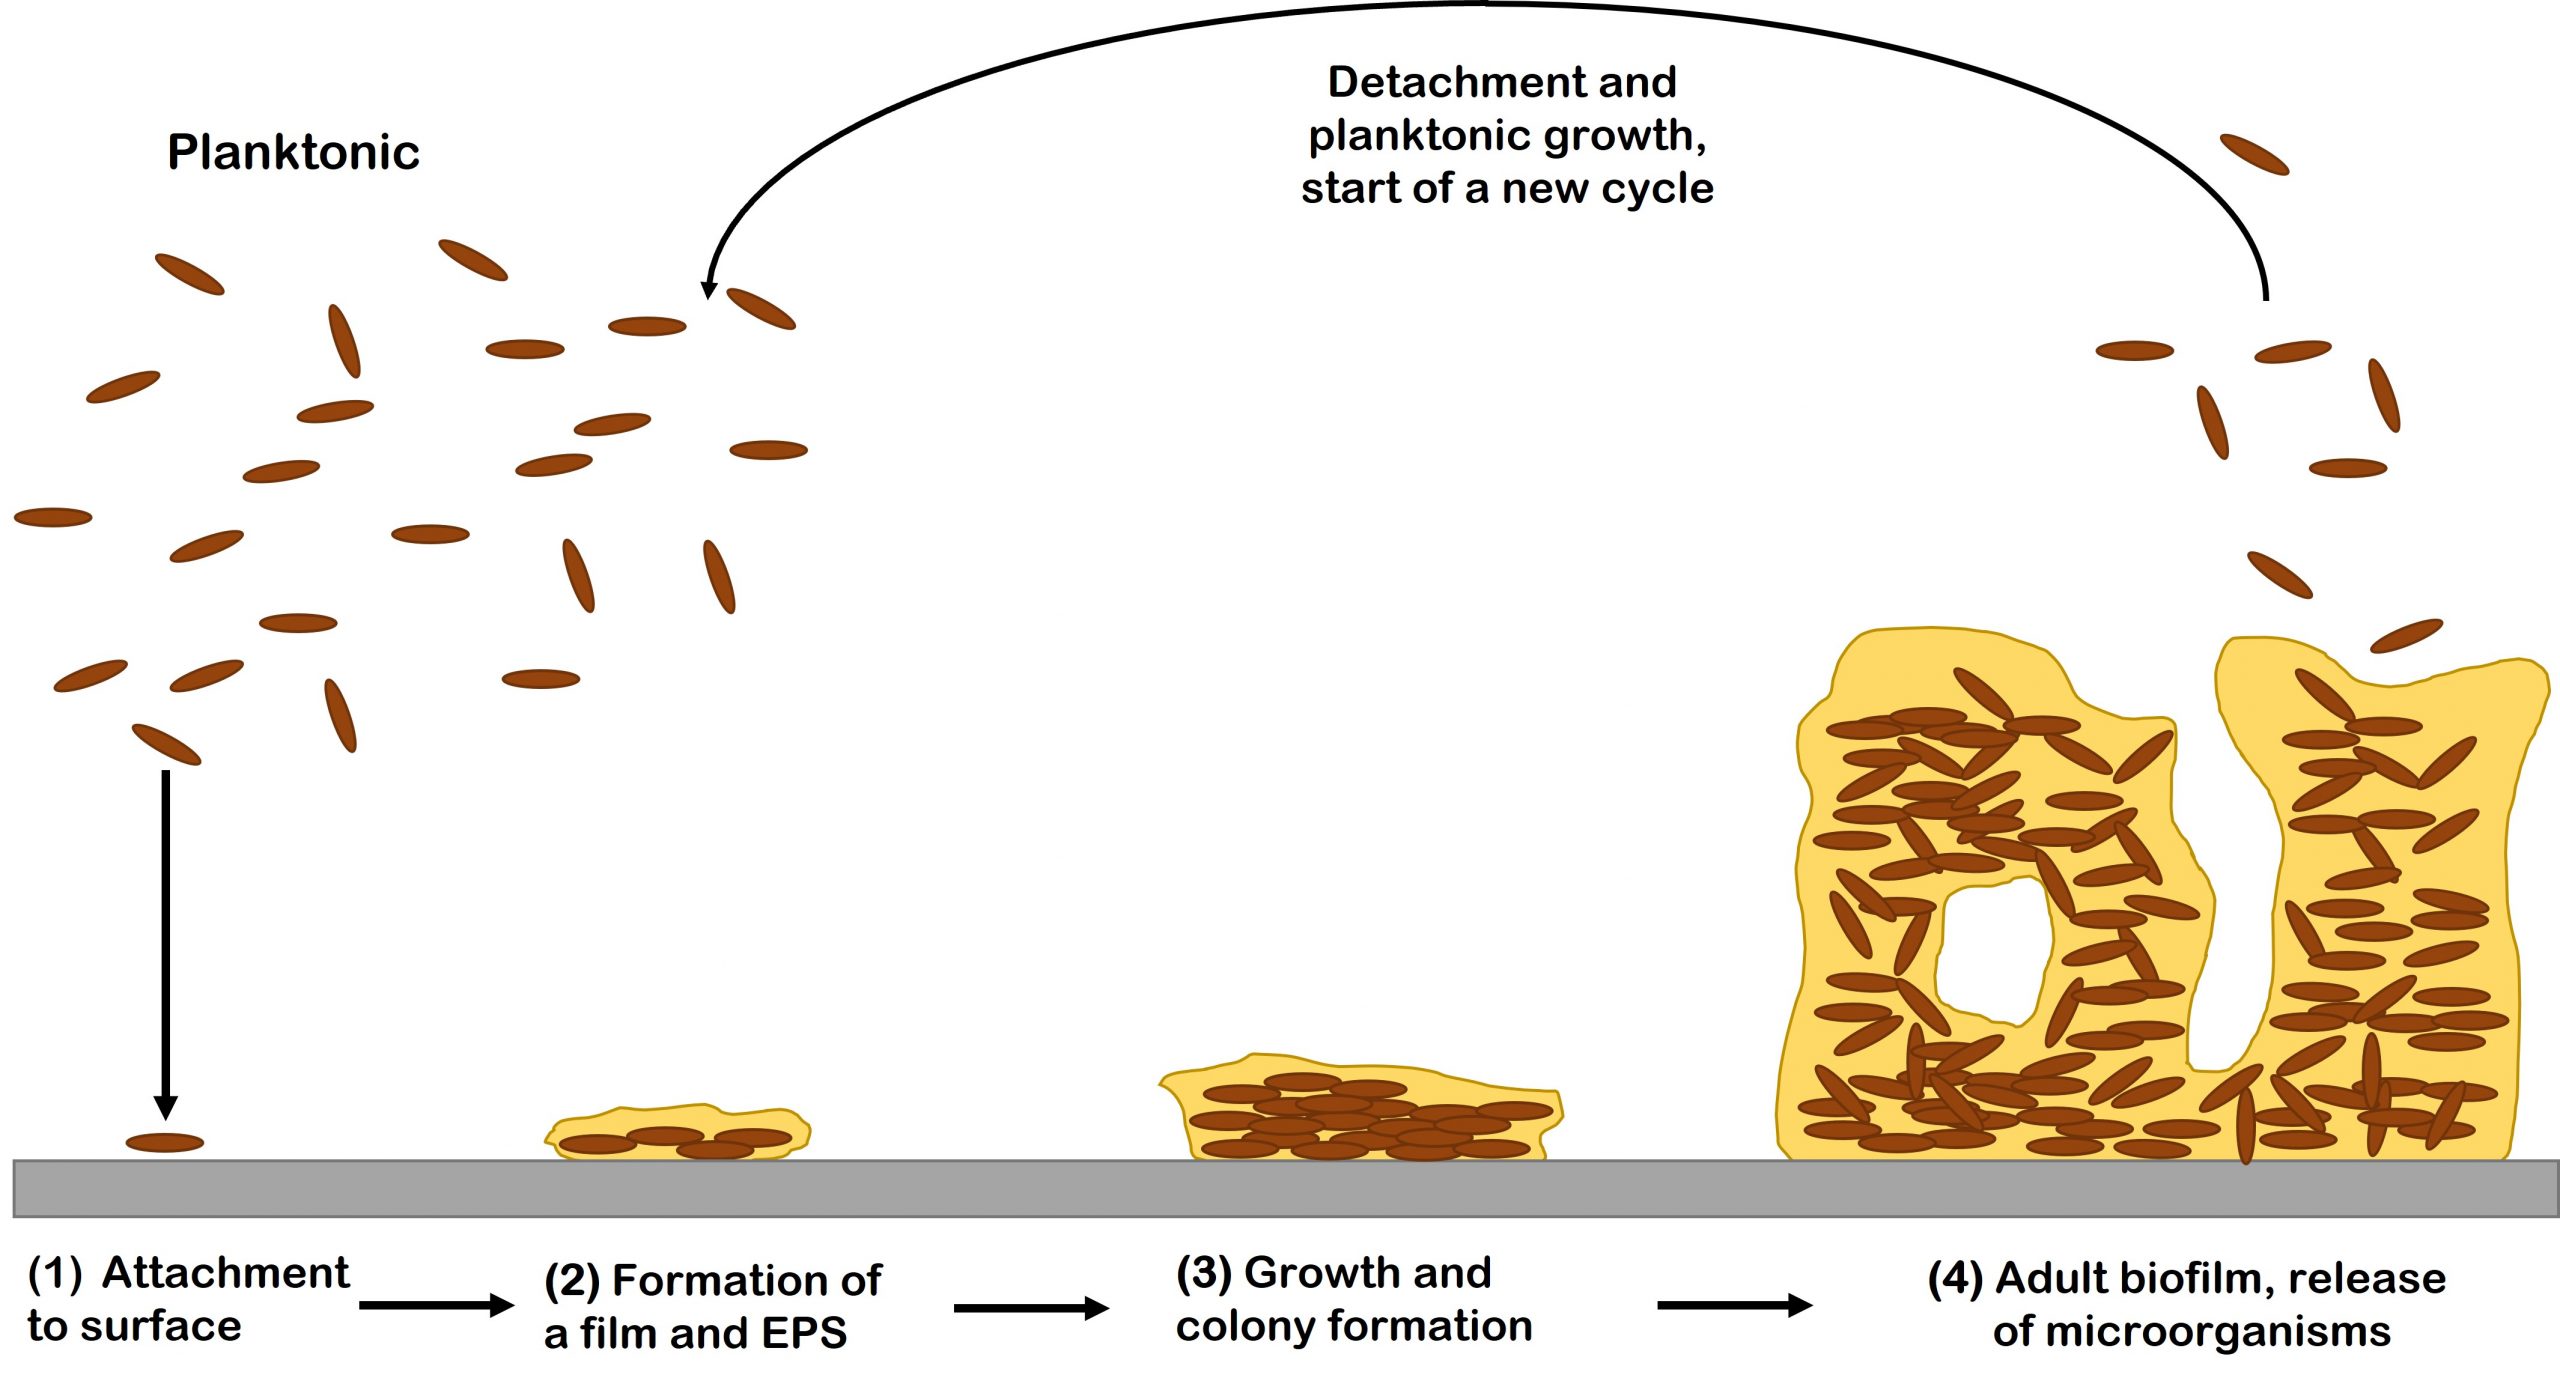 Biofilm Production and Growth